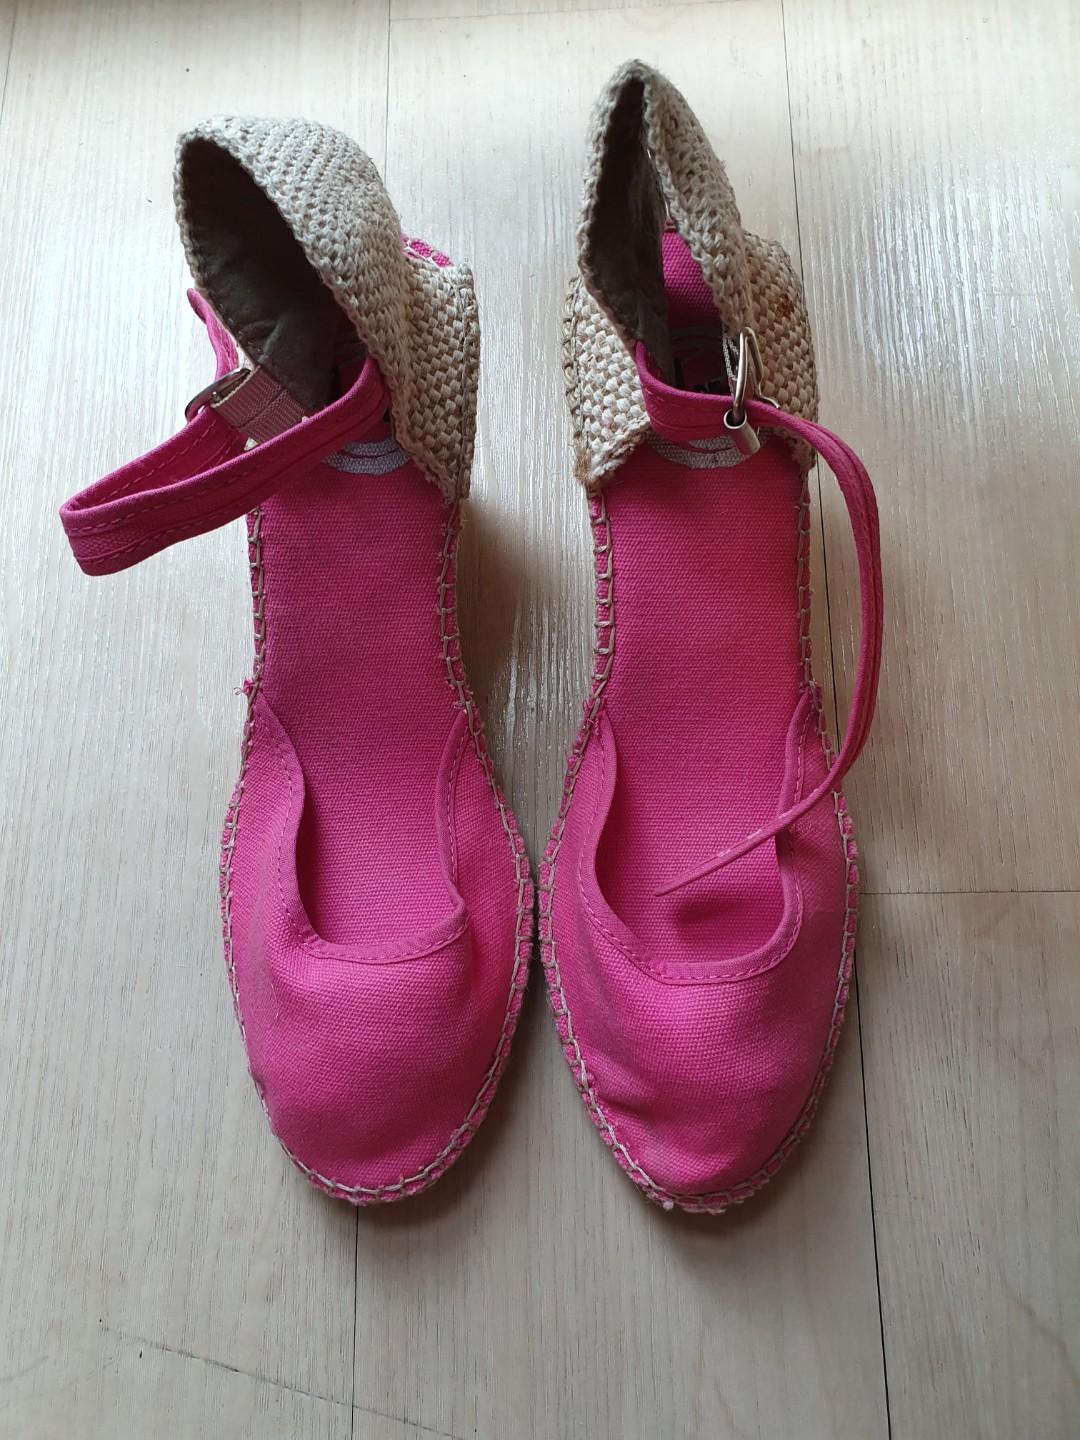 Hot Pink Wedges Espadrilles (3 in stock 